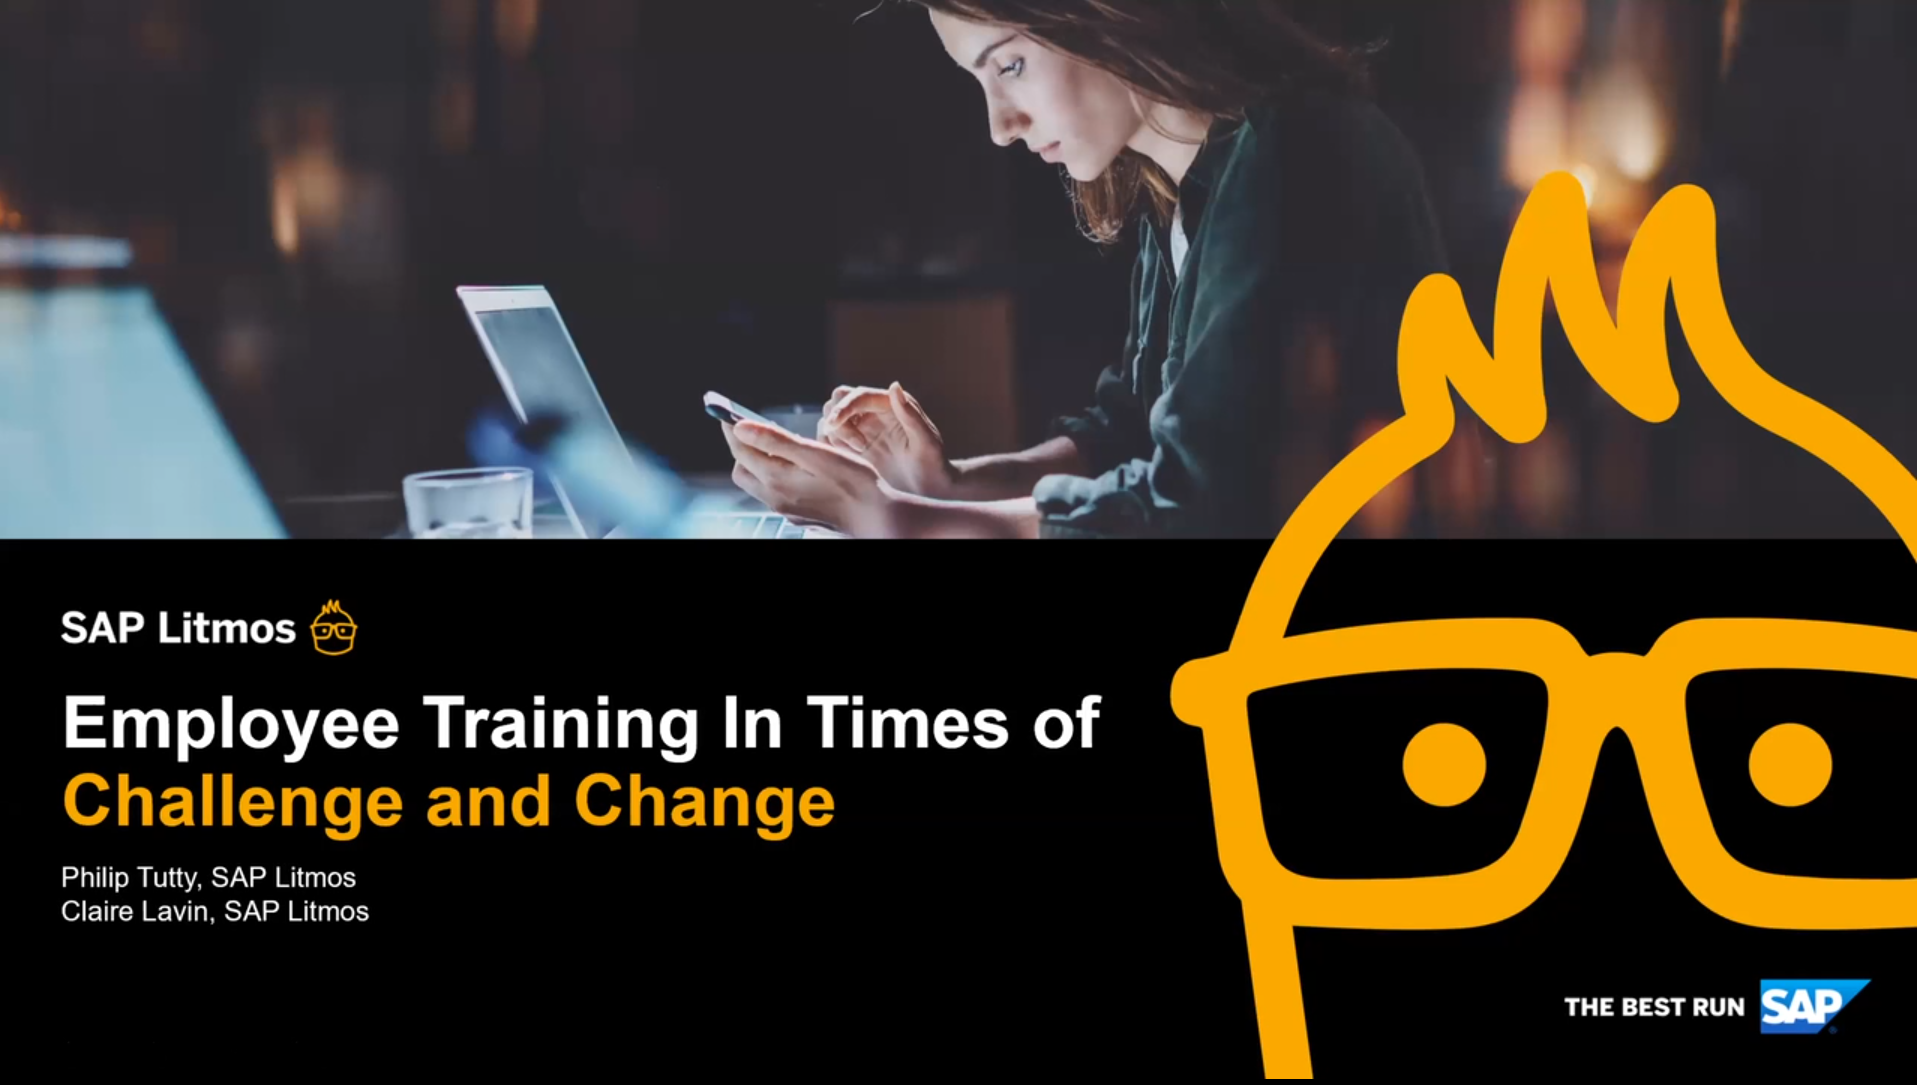 Employee Training in Times of Challenge and Change